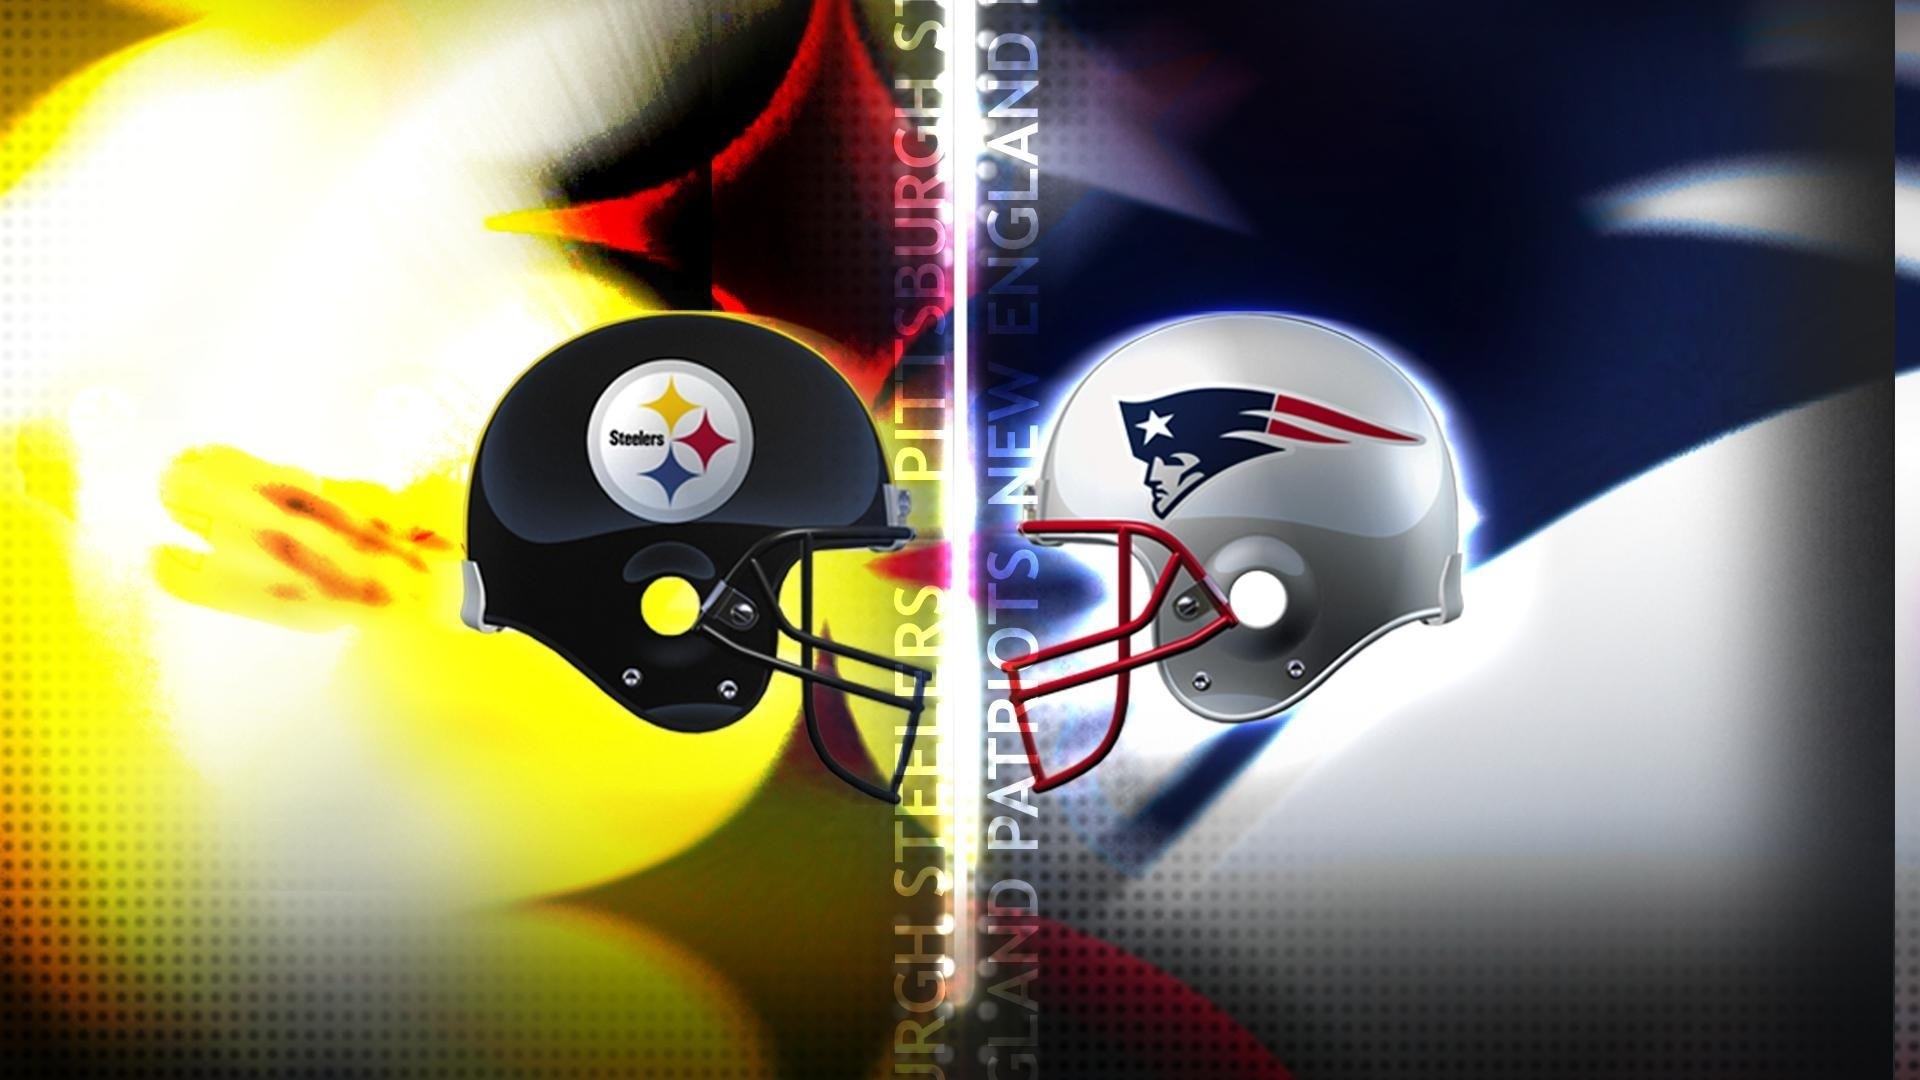 Wallpaper Desktop Pittsburgh Steelers Football HD With Resolution 1920X1080 pixel. You can make this wallpaper for your Mac or Windows Desktop Background, iPhone, Android or Tablet and another Smartphone device for free